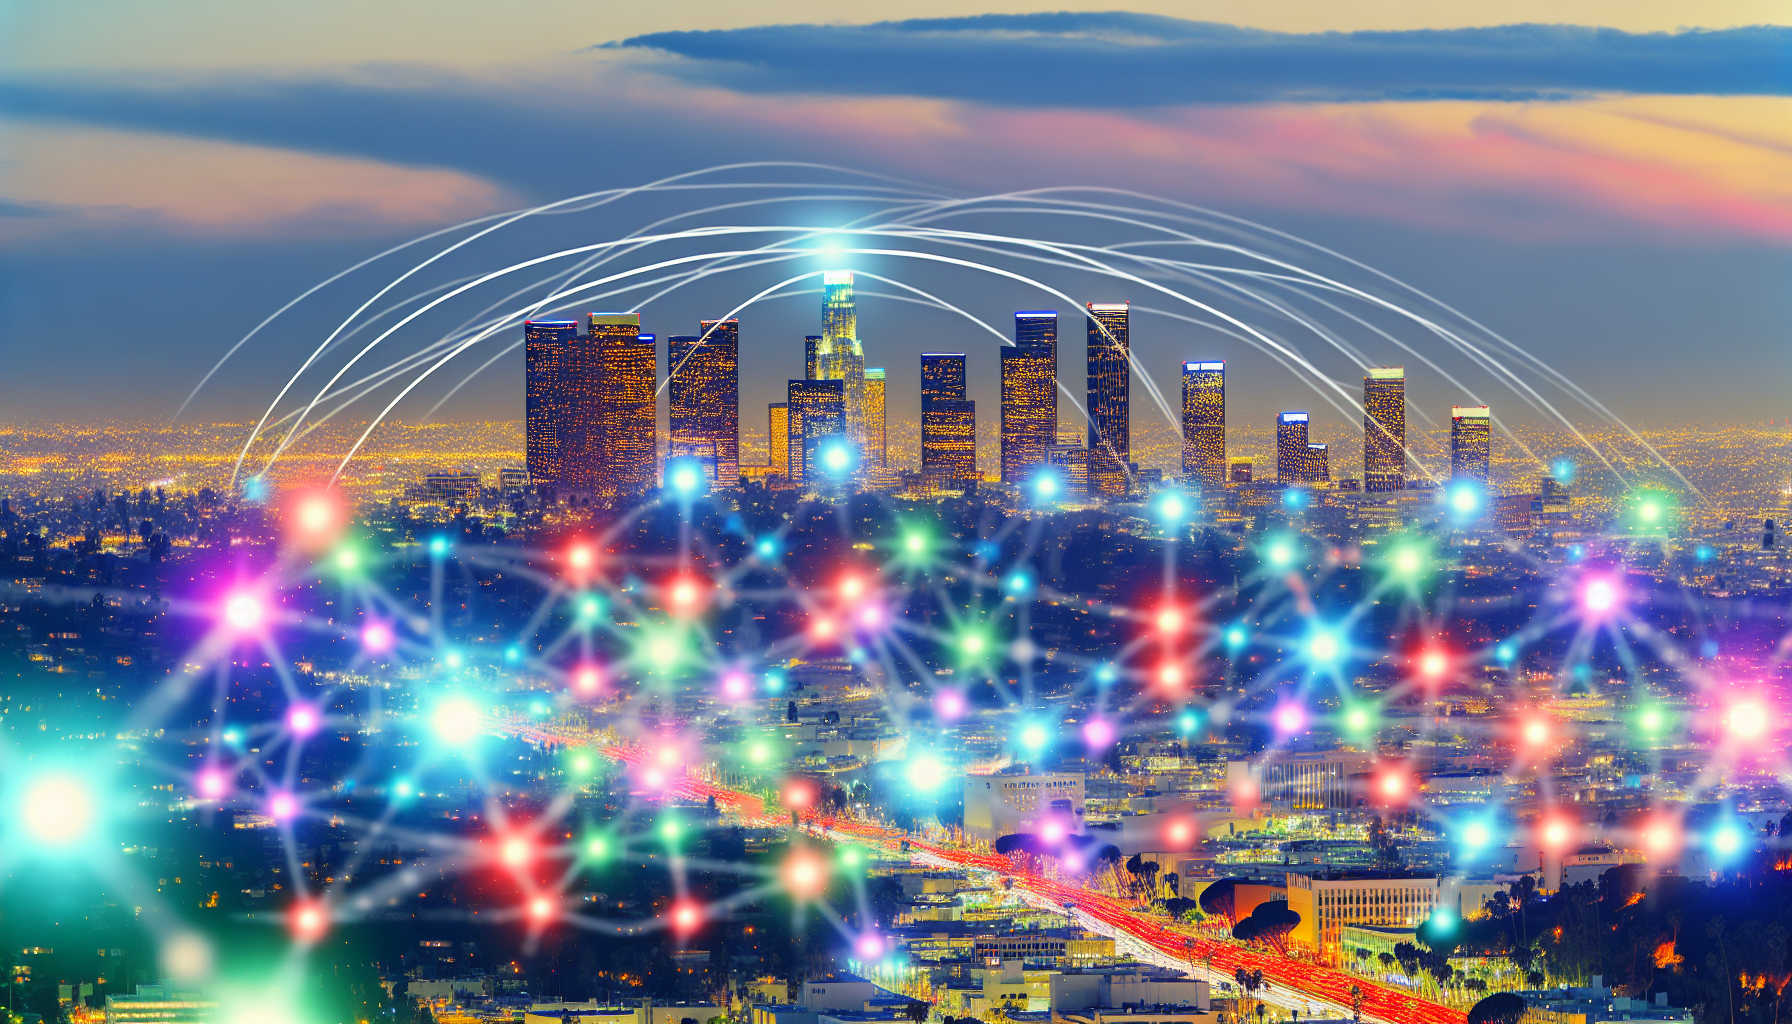 Los Angeles skyline with overlay of digital network nodes representing IoT